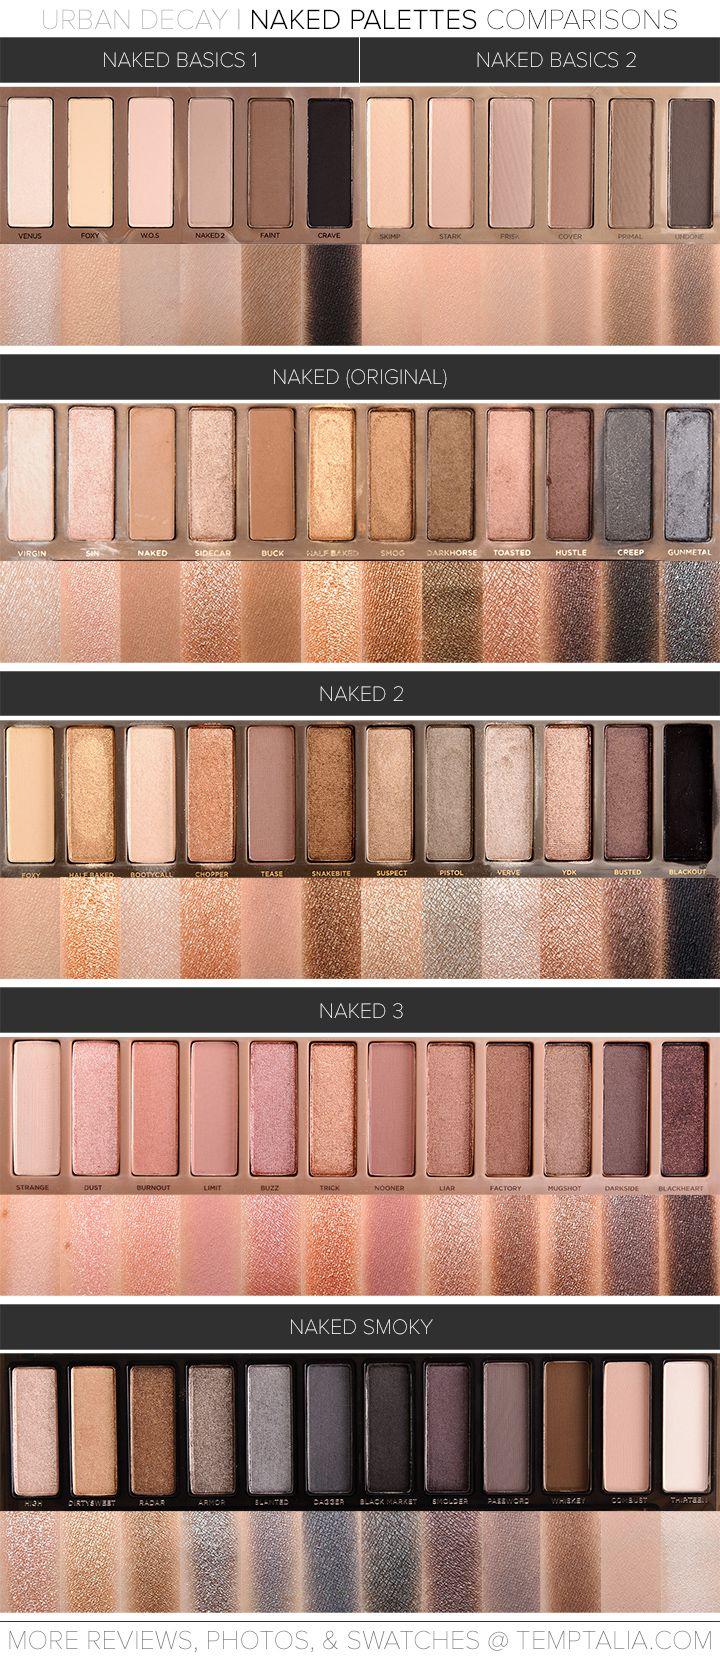 Mariage - Urban Decay Naked Palettes Mega Comparison Photos & Swatches